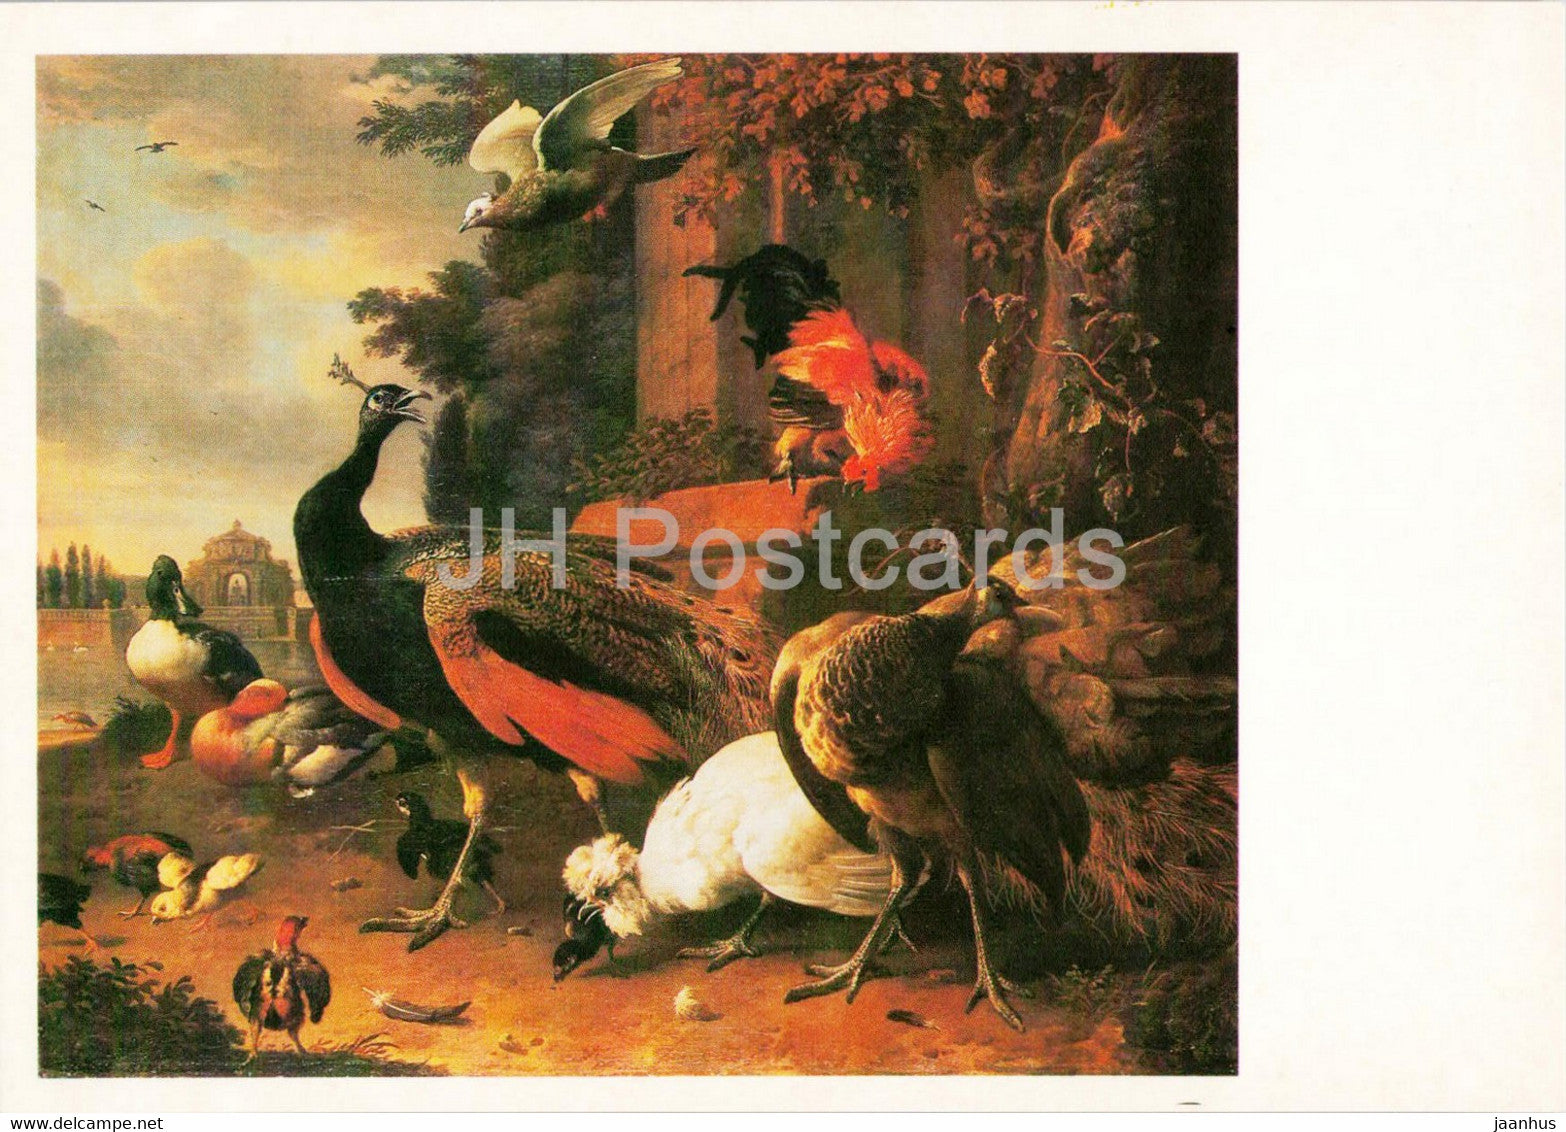 painting by Melchior d'Hondecoeter - Birds in the Park - Dutch art - 1987 - Russia USSR - unused - JH Postcards